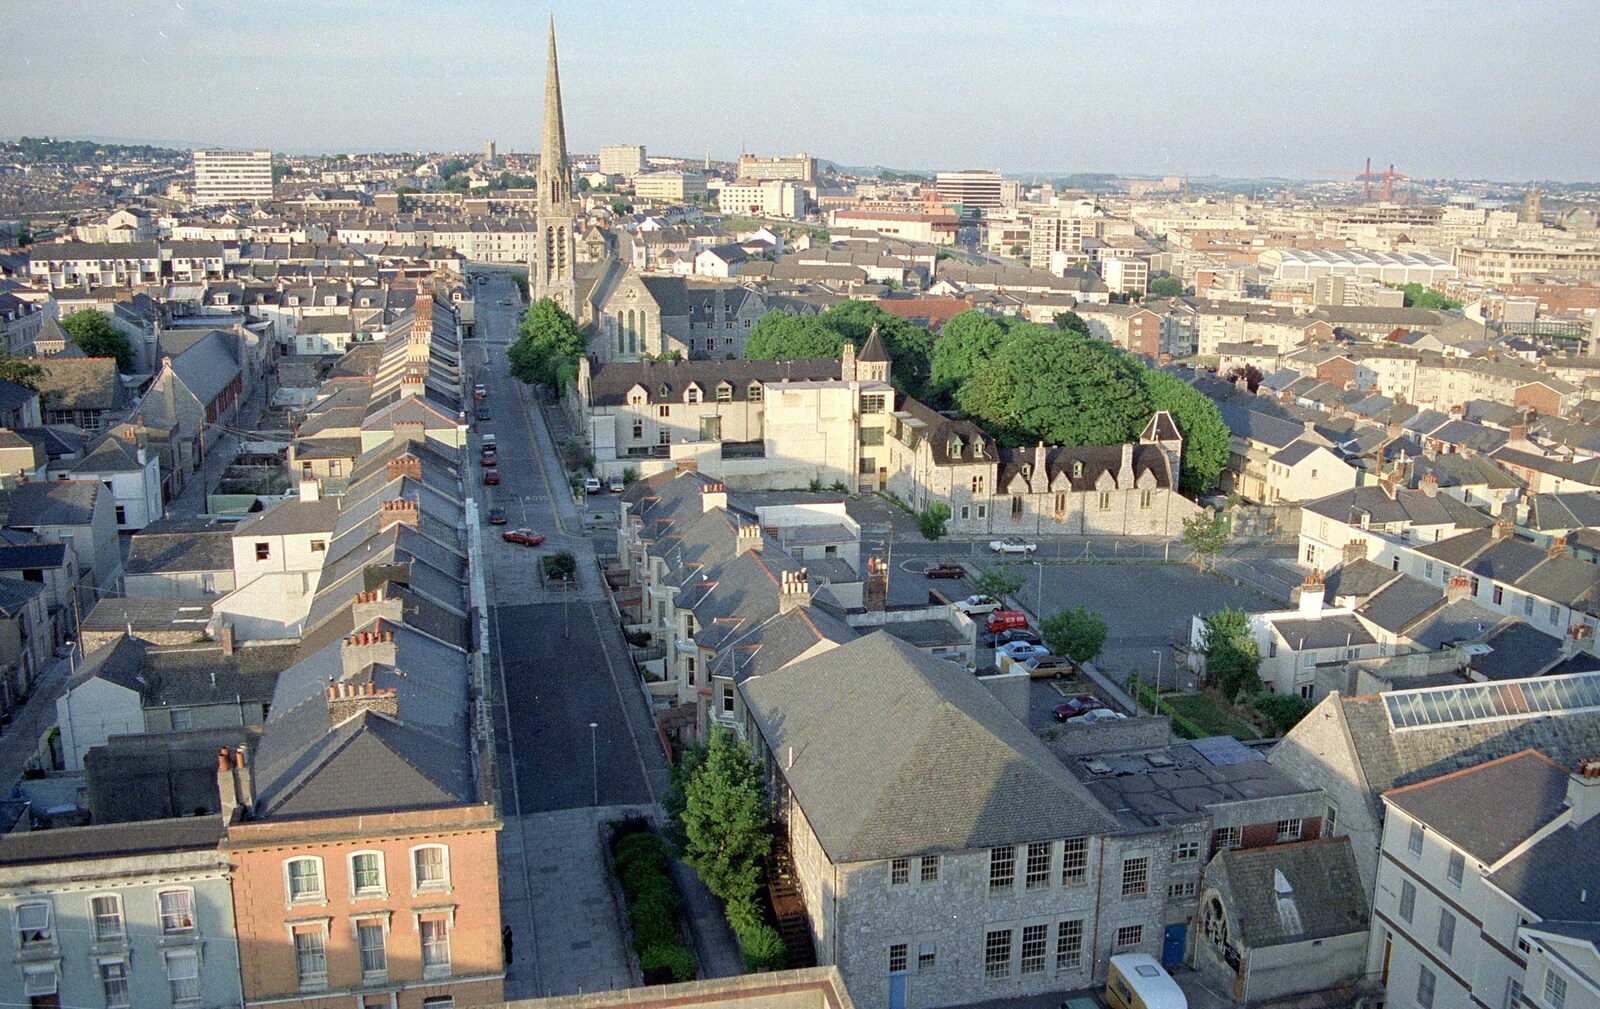 Looking up towards North Road East from Uni: Views From St. Peter's Church Tower, Wyndham Square, Plymouth, Devon - 15th June 1989